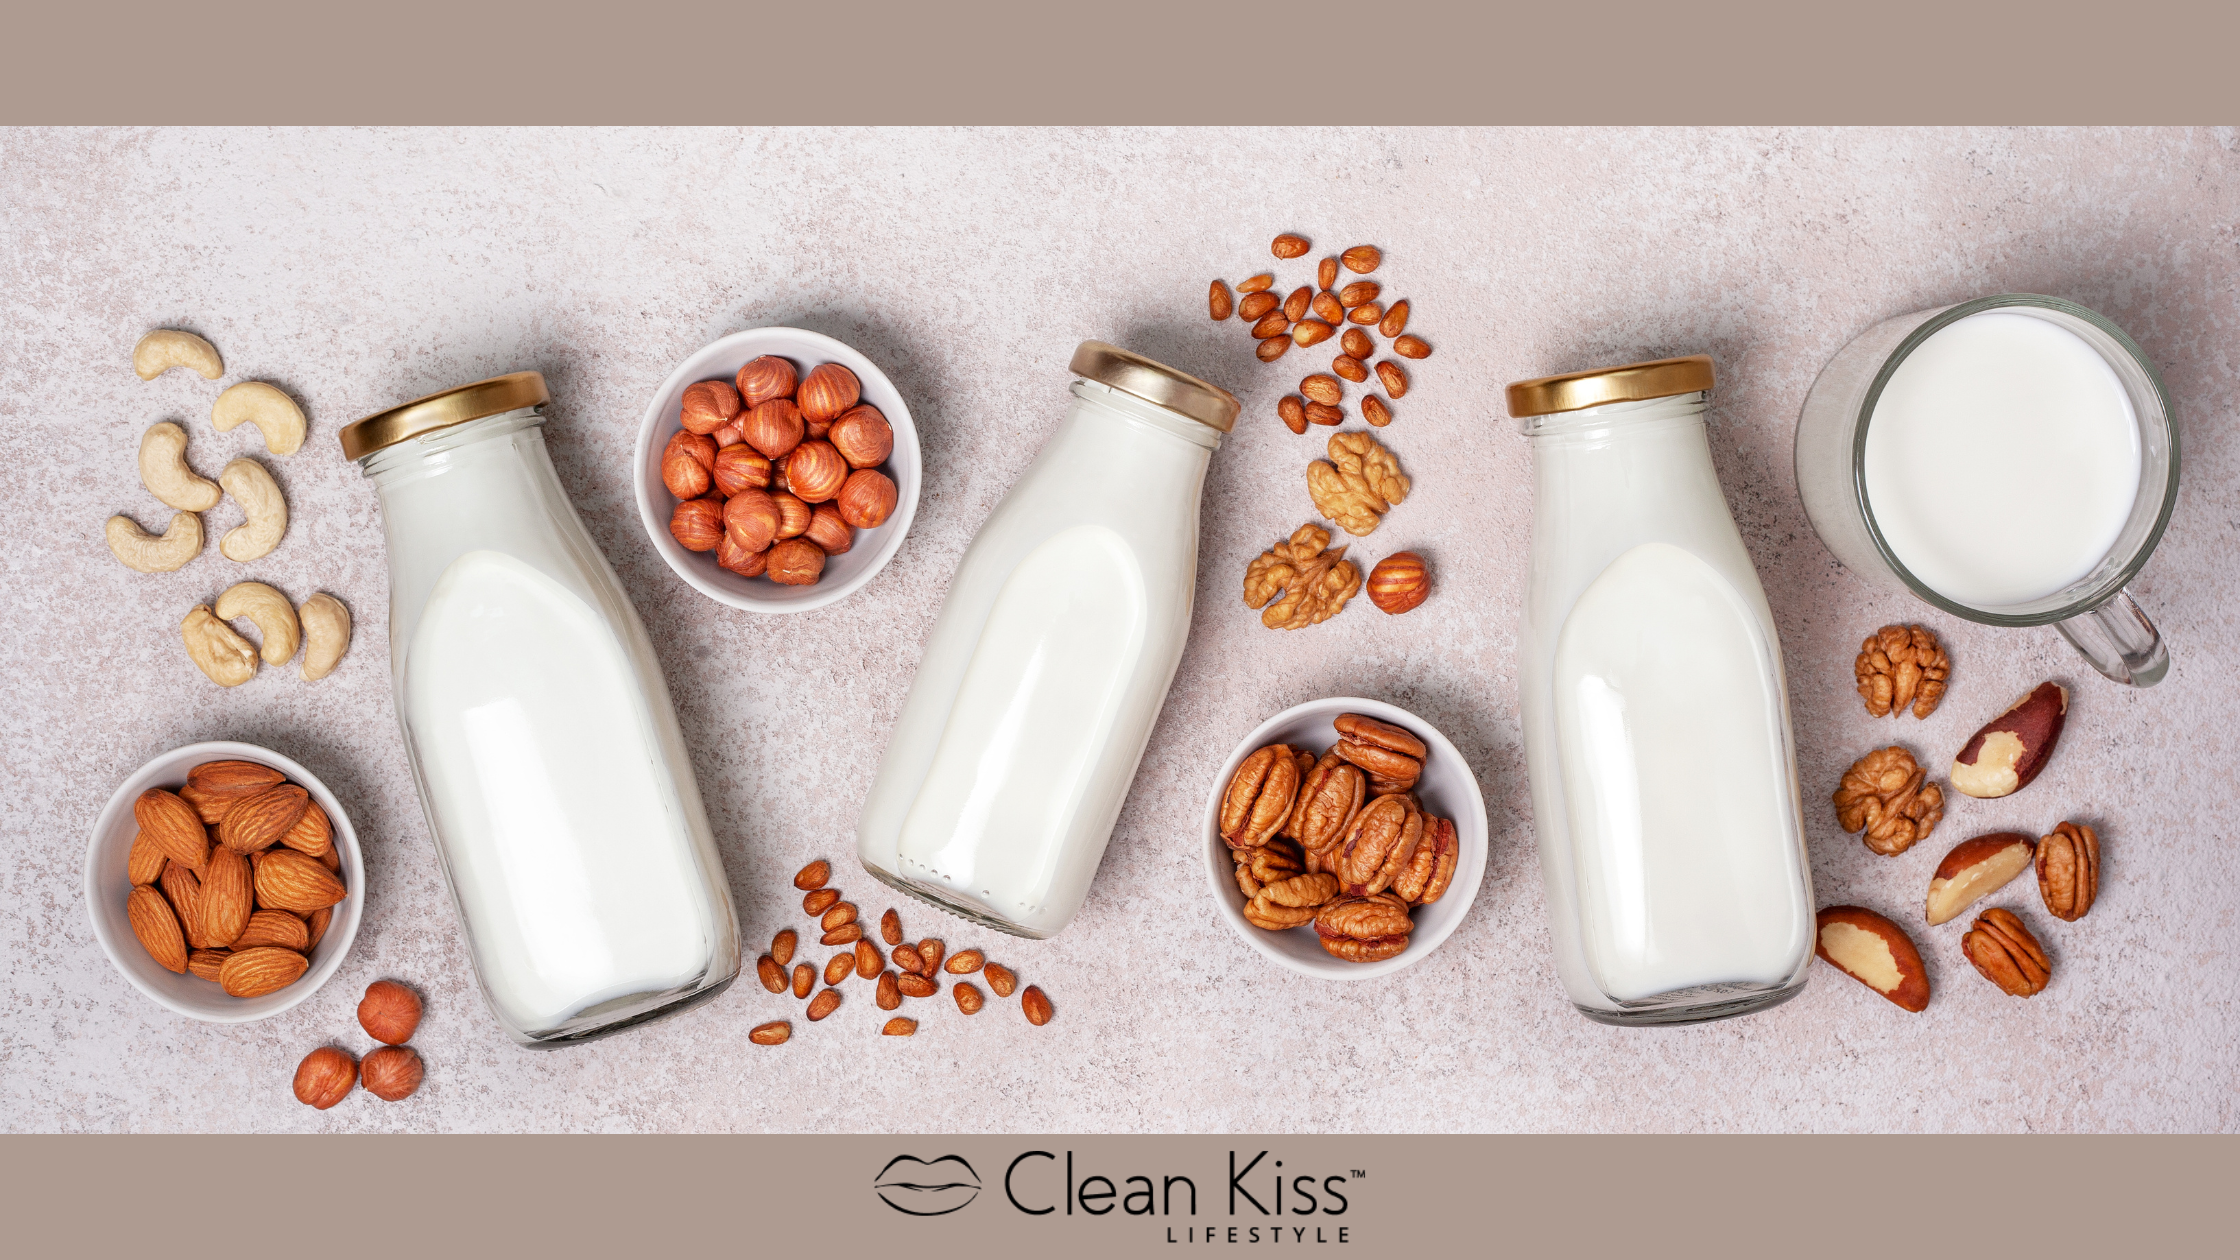 How to Make Brazil Nut Milk for Glowing Skin